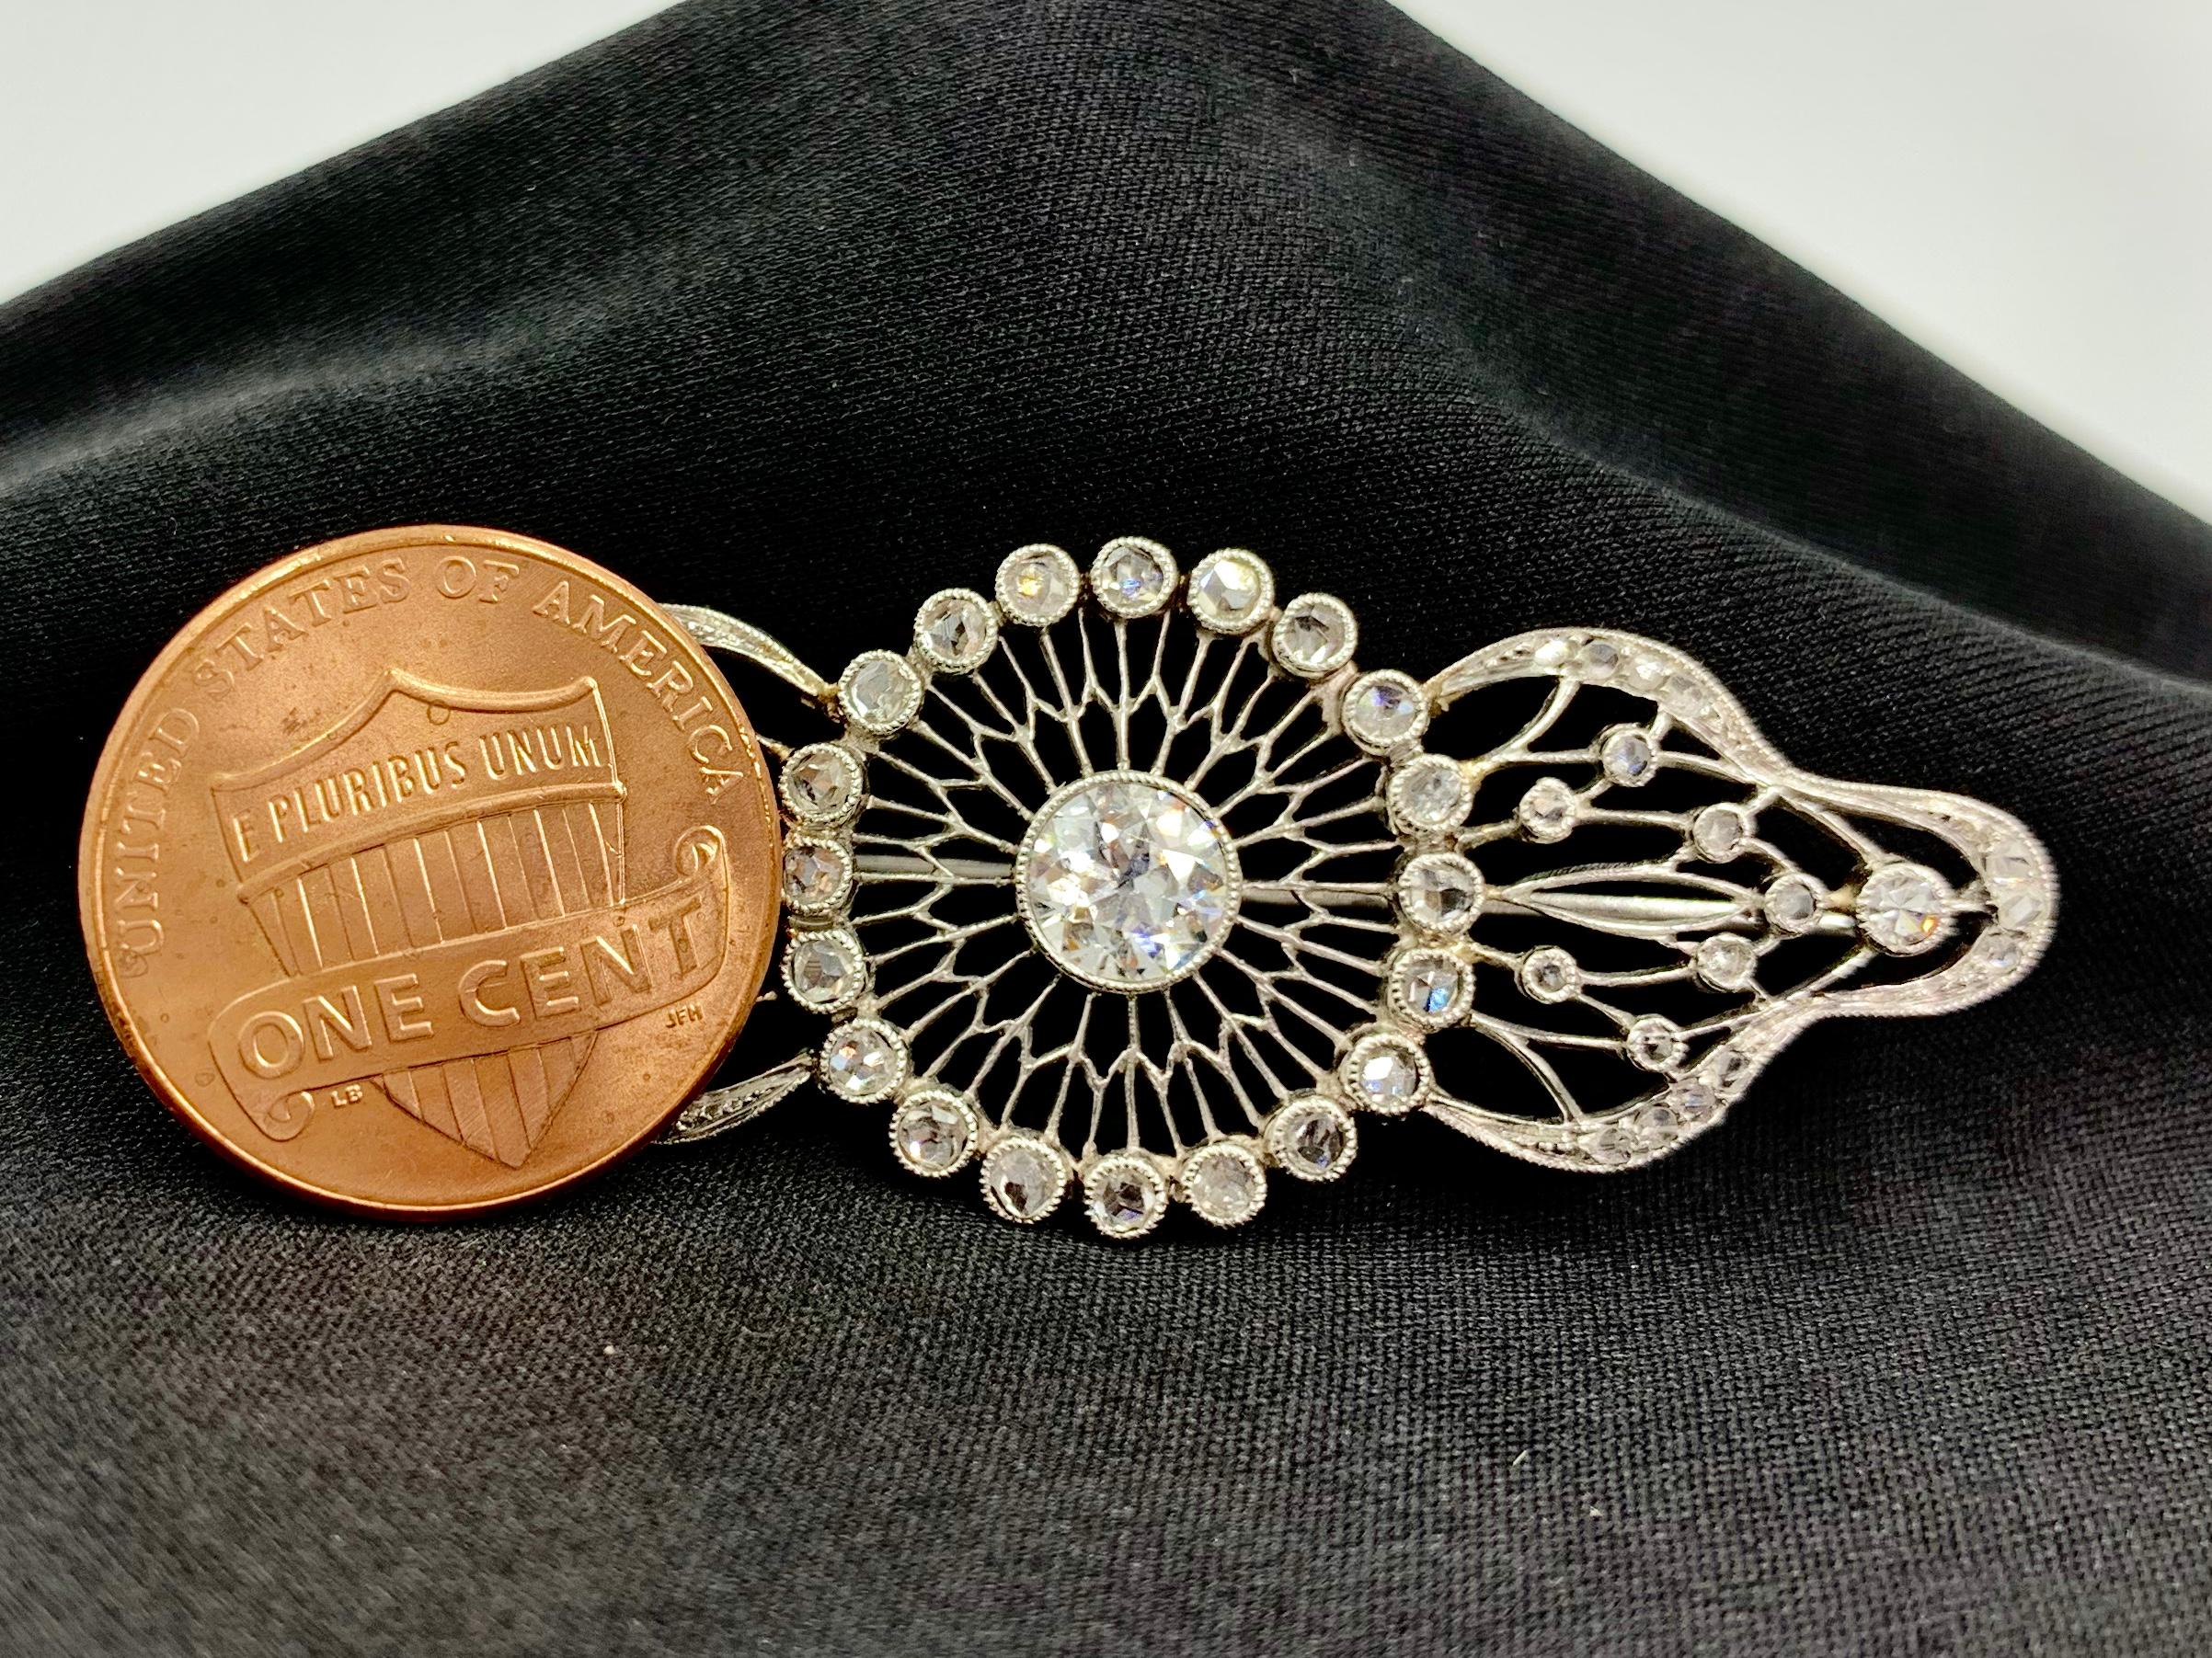 Edwardian White Gold Diamond Filigree Brooch, circa 1920 In Fair Condition For Sale In Pikesville, MD